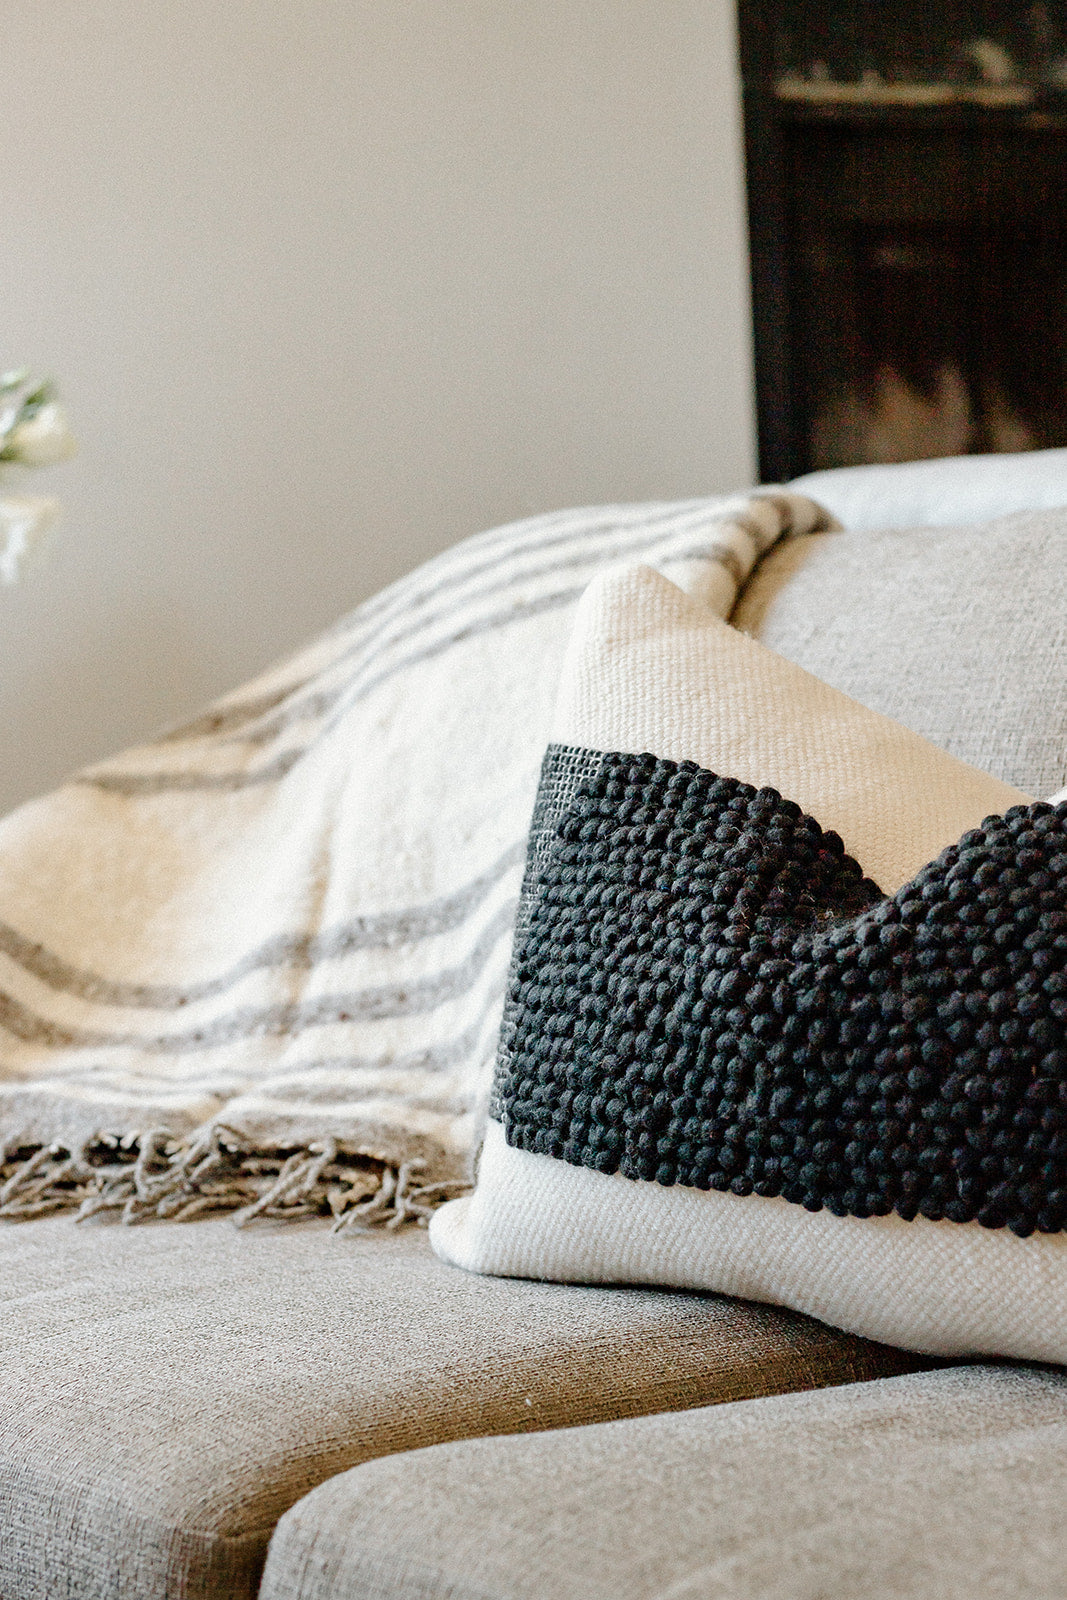 The Cruz Pillow features a natural colored flat weave mixed with a wide contrast stripe of black textured loops. Ethically produced and hand woven by talented artisans in India.